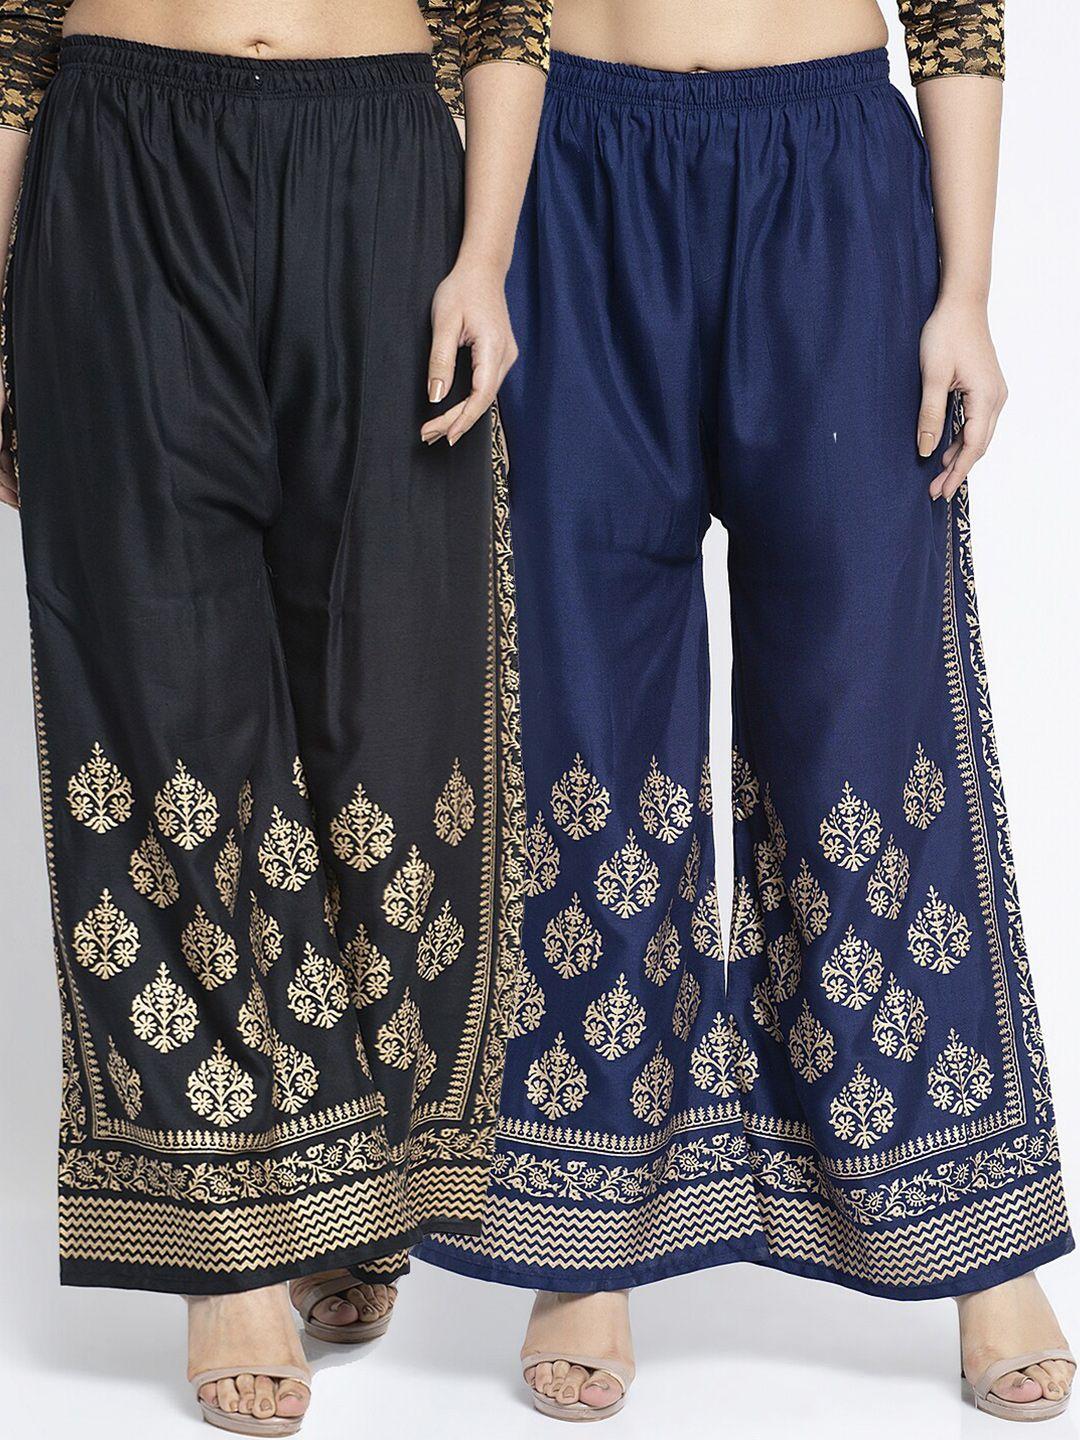 jinfo women black & navy blue set of 2 ethnic printed flared knitted ethnic palazzos